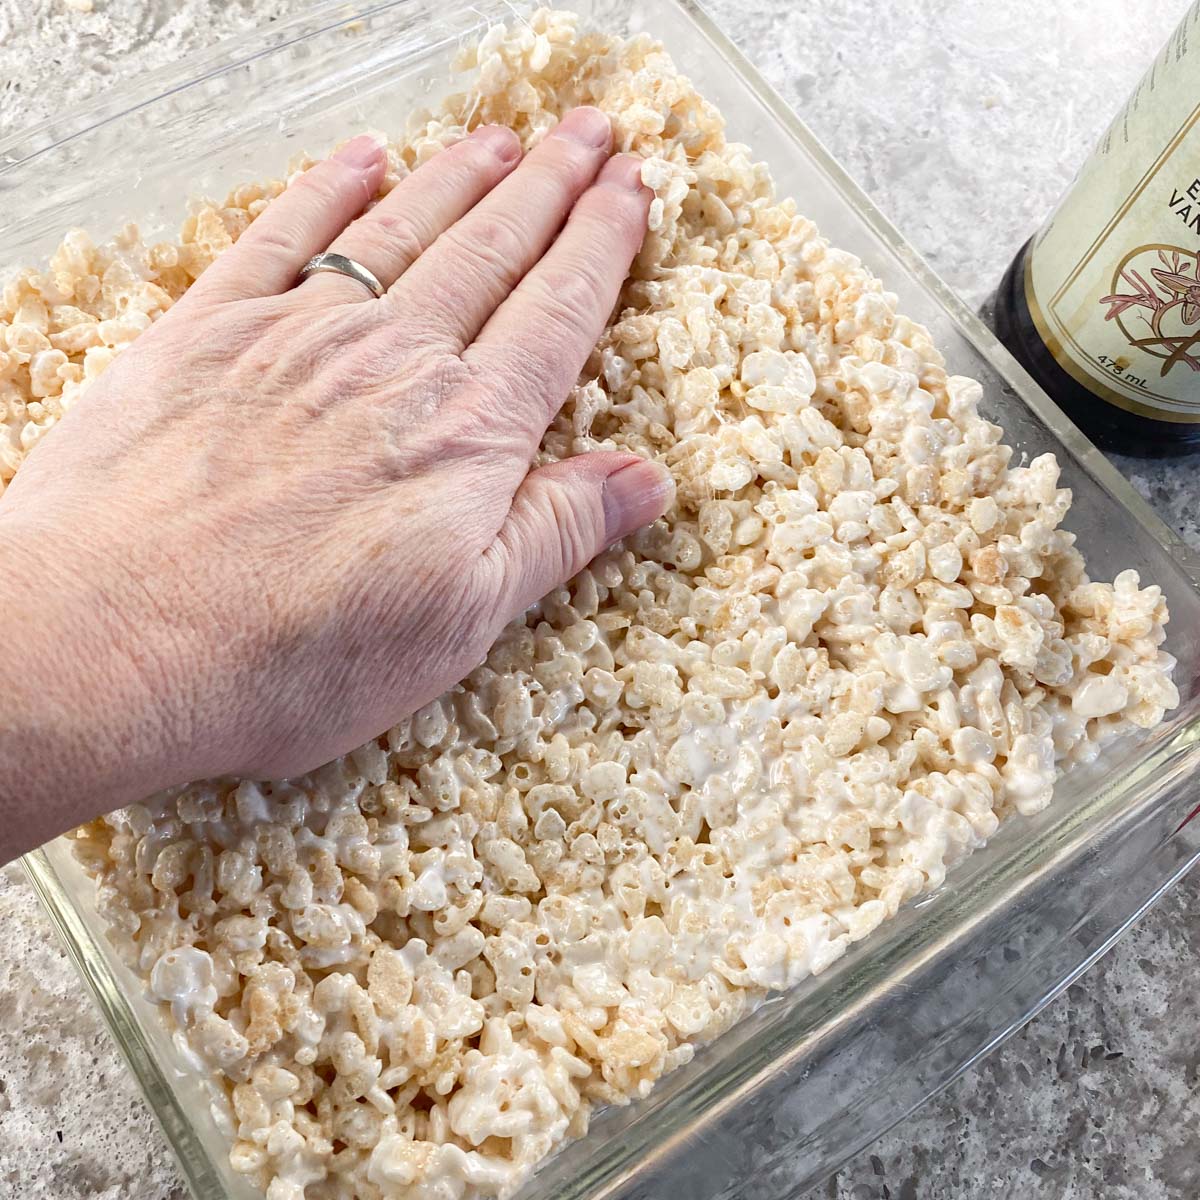 Rice Krispie treat being pressed by hand into glass baking dish.